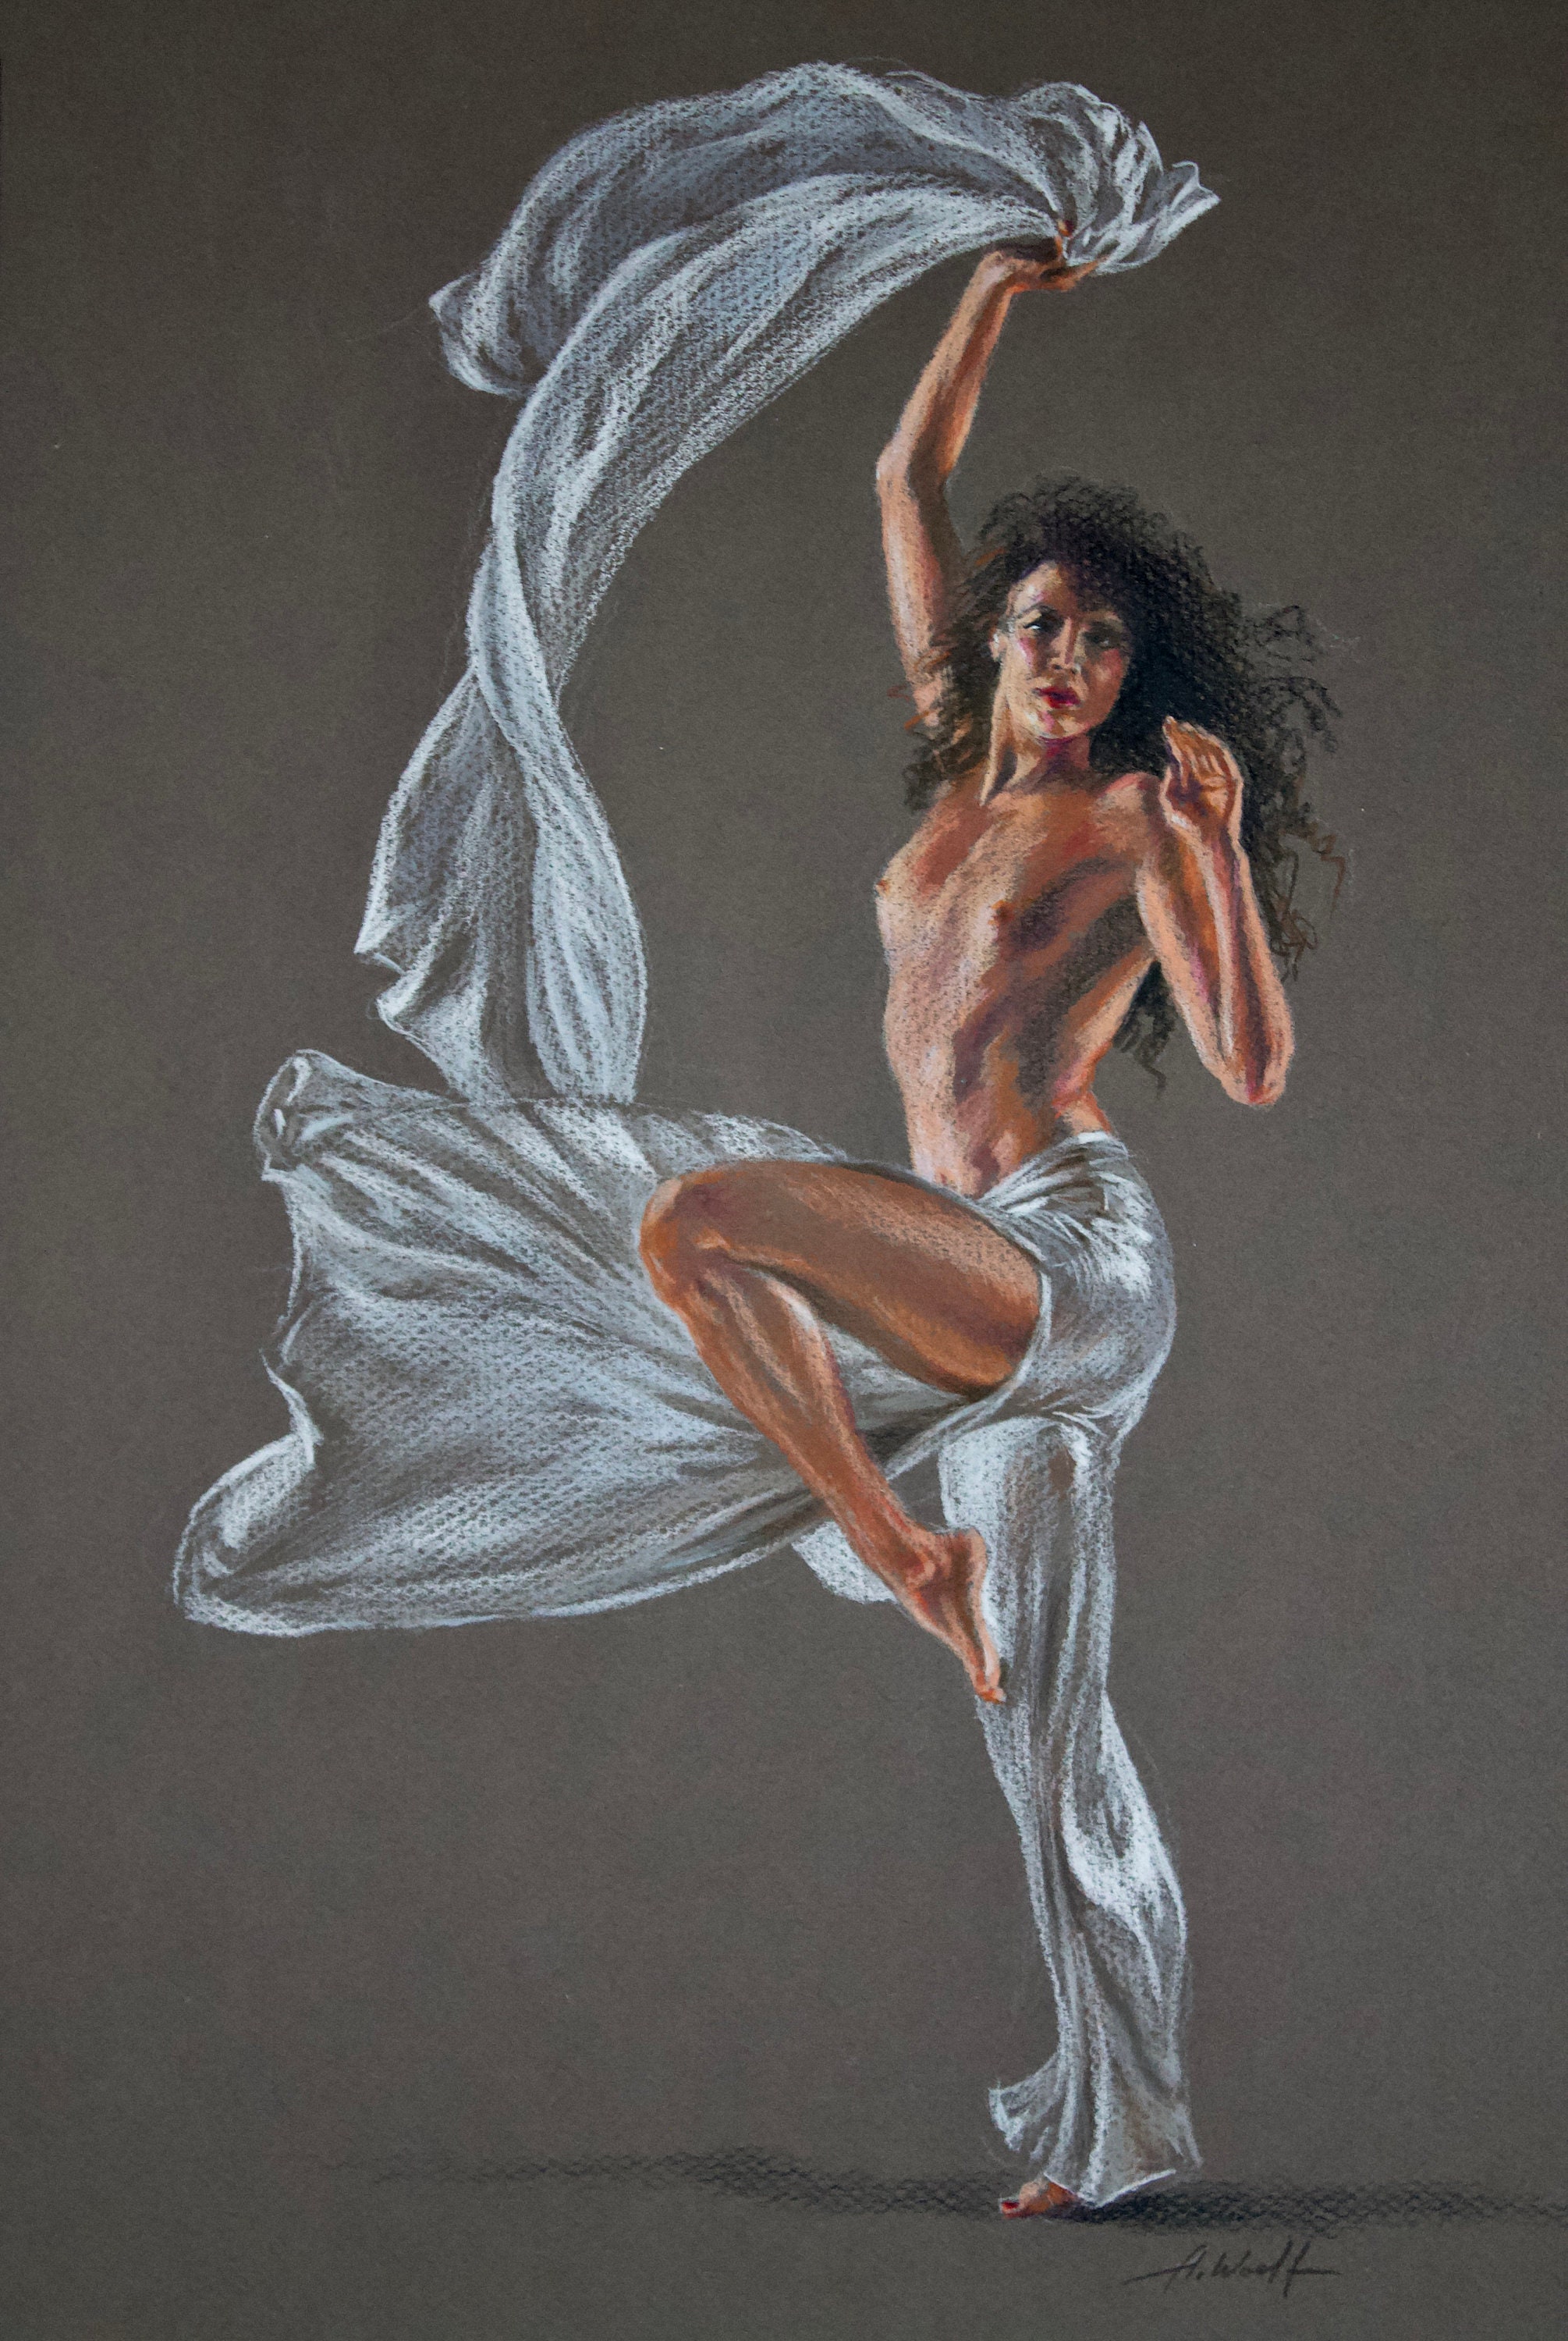 EROTIC ART NUDE Female Dancer Colored Pencil Drawing image photo